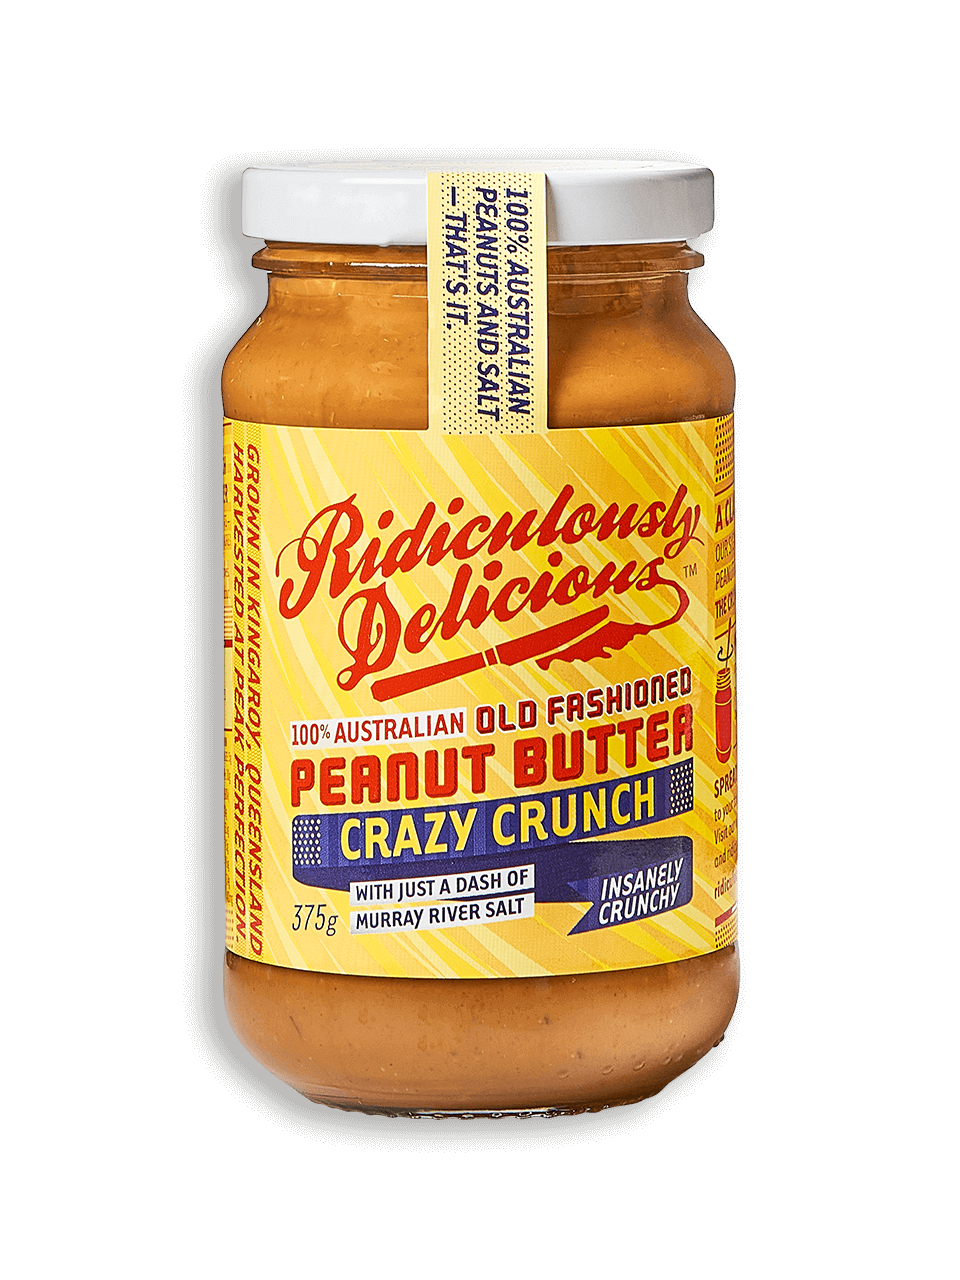 Ridiculously Delicious Peanut Butter - Crazy Crunch